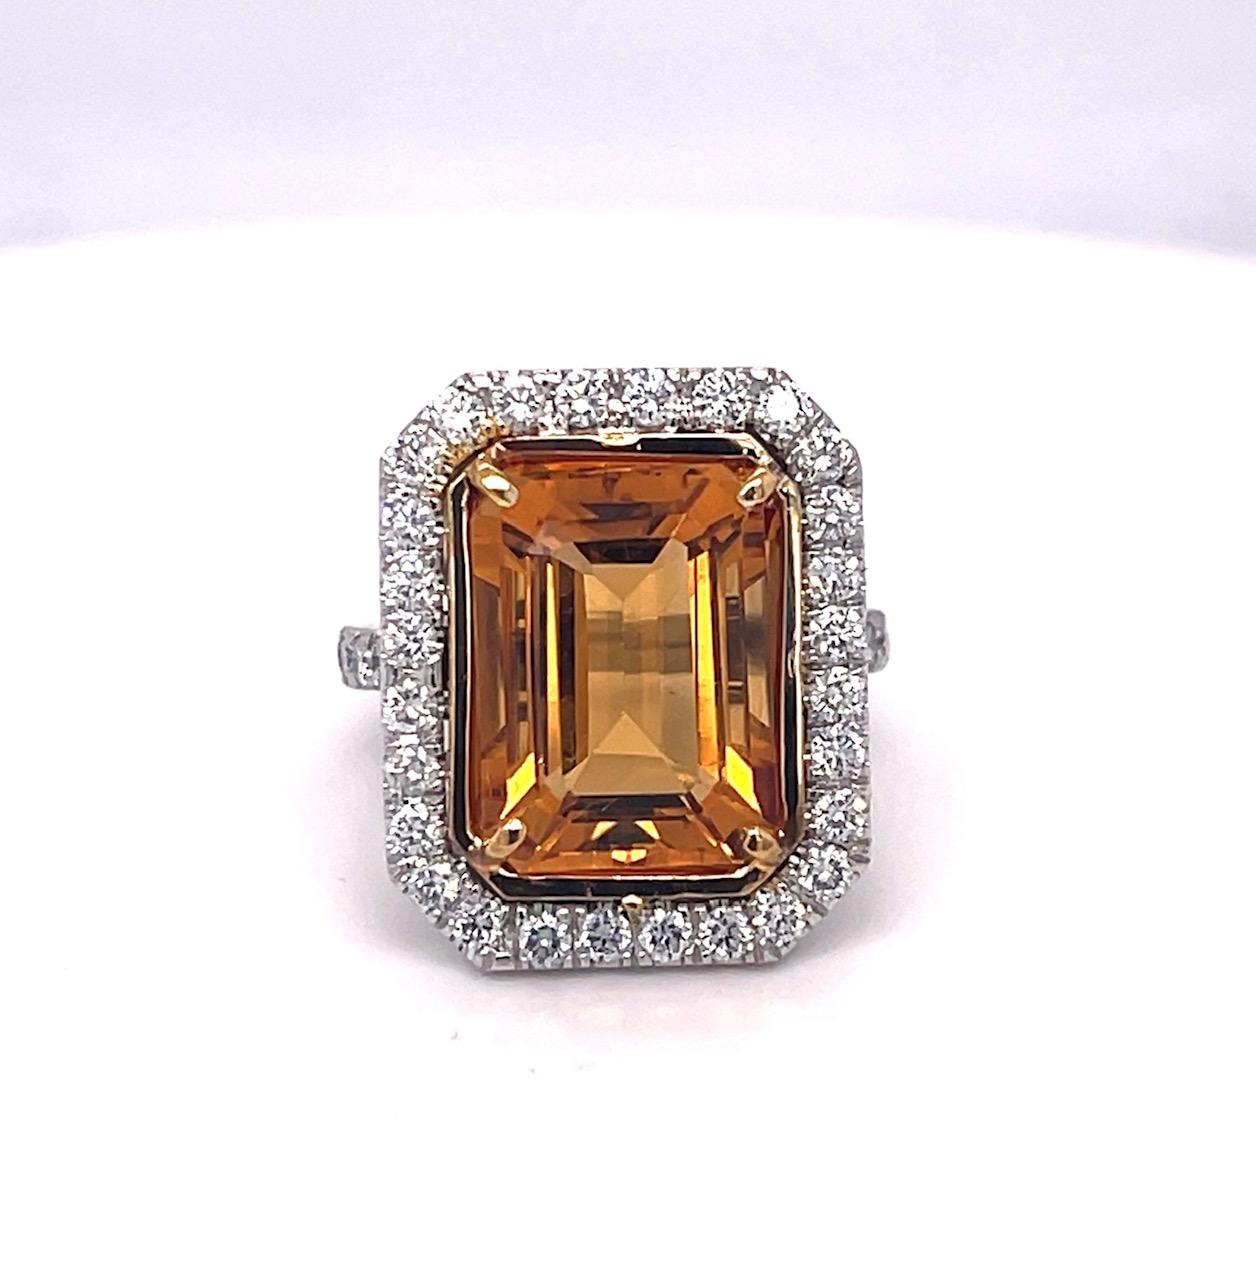 Emerald Cut Citrine and Diamond 7.71 Carats Ring, Platinum / 18KYG For Sale 1